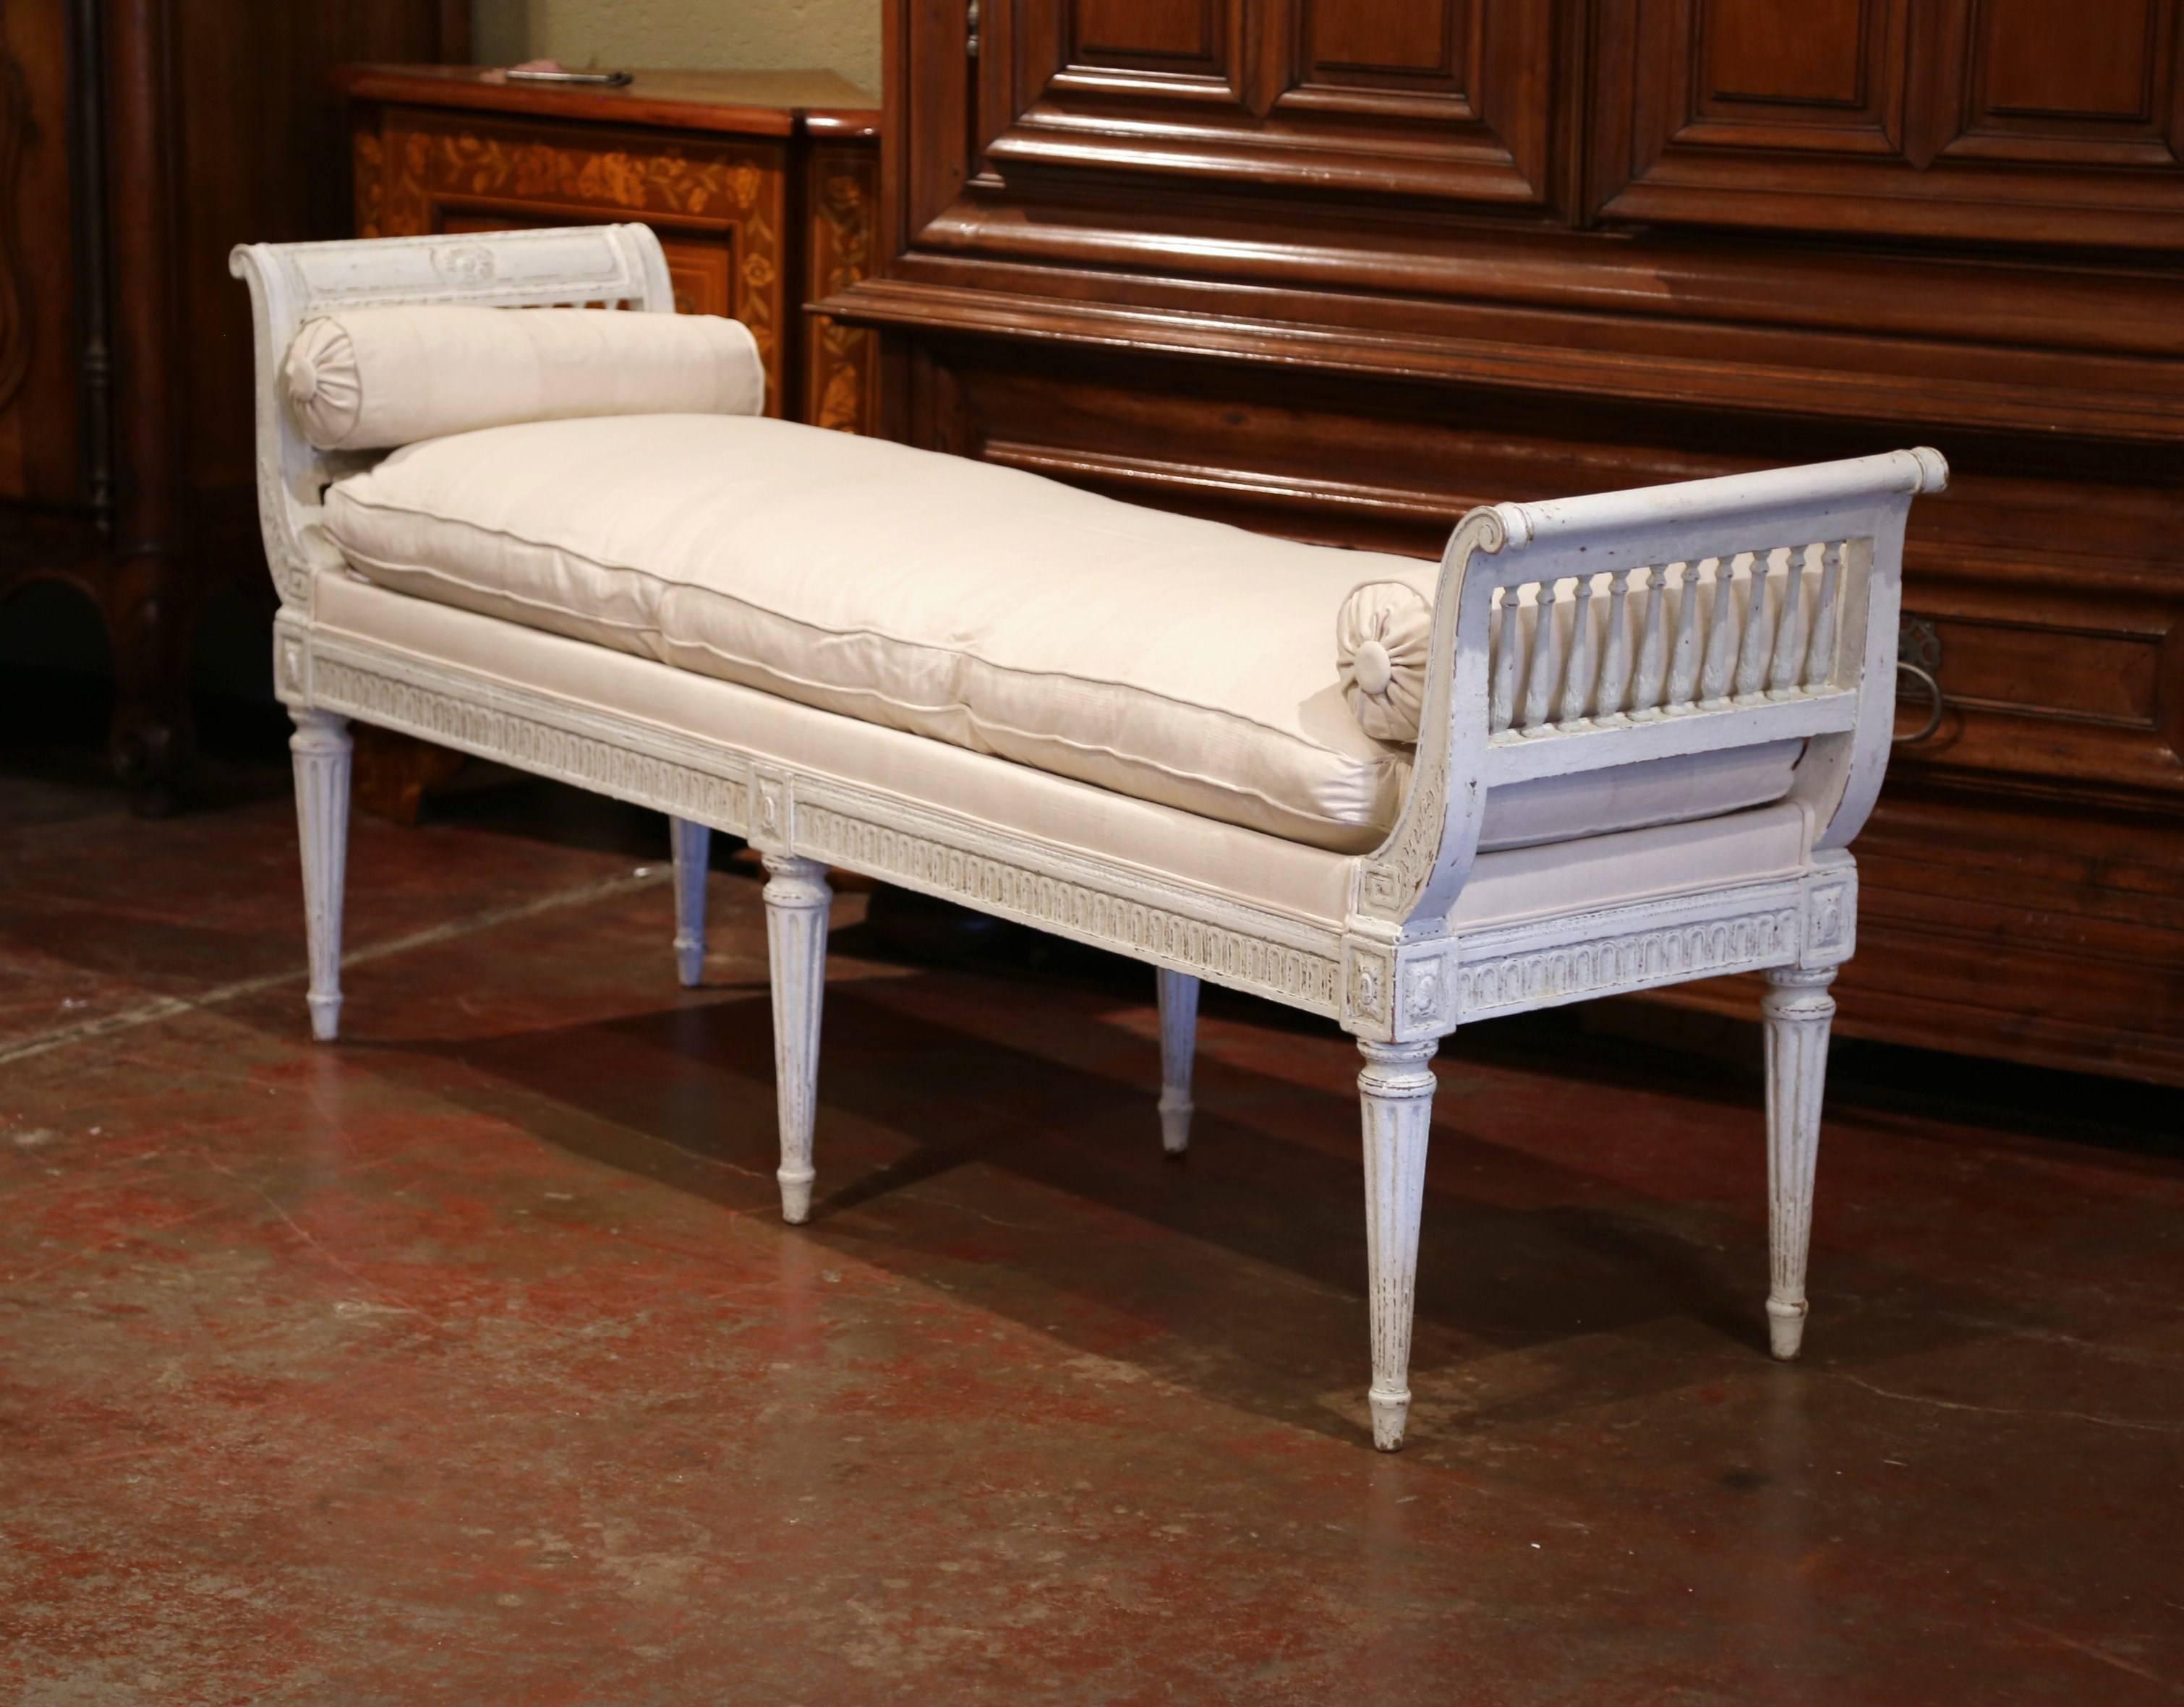 Place this elegant antique six-leg bench at the foot of a king-size bed or in your living room for extra, versatile seating. Crafted in France, circa 1880, the traditional banquette features a curved back with spinals, detailed carvings around the